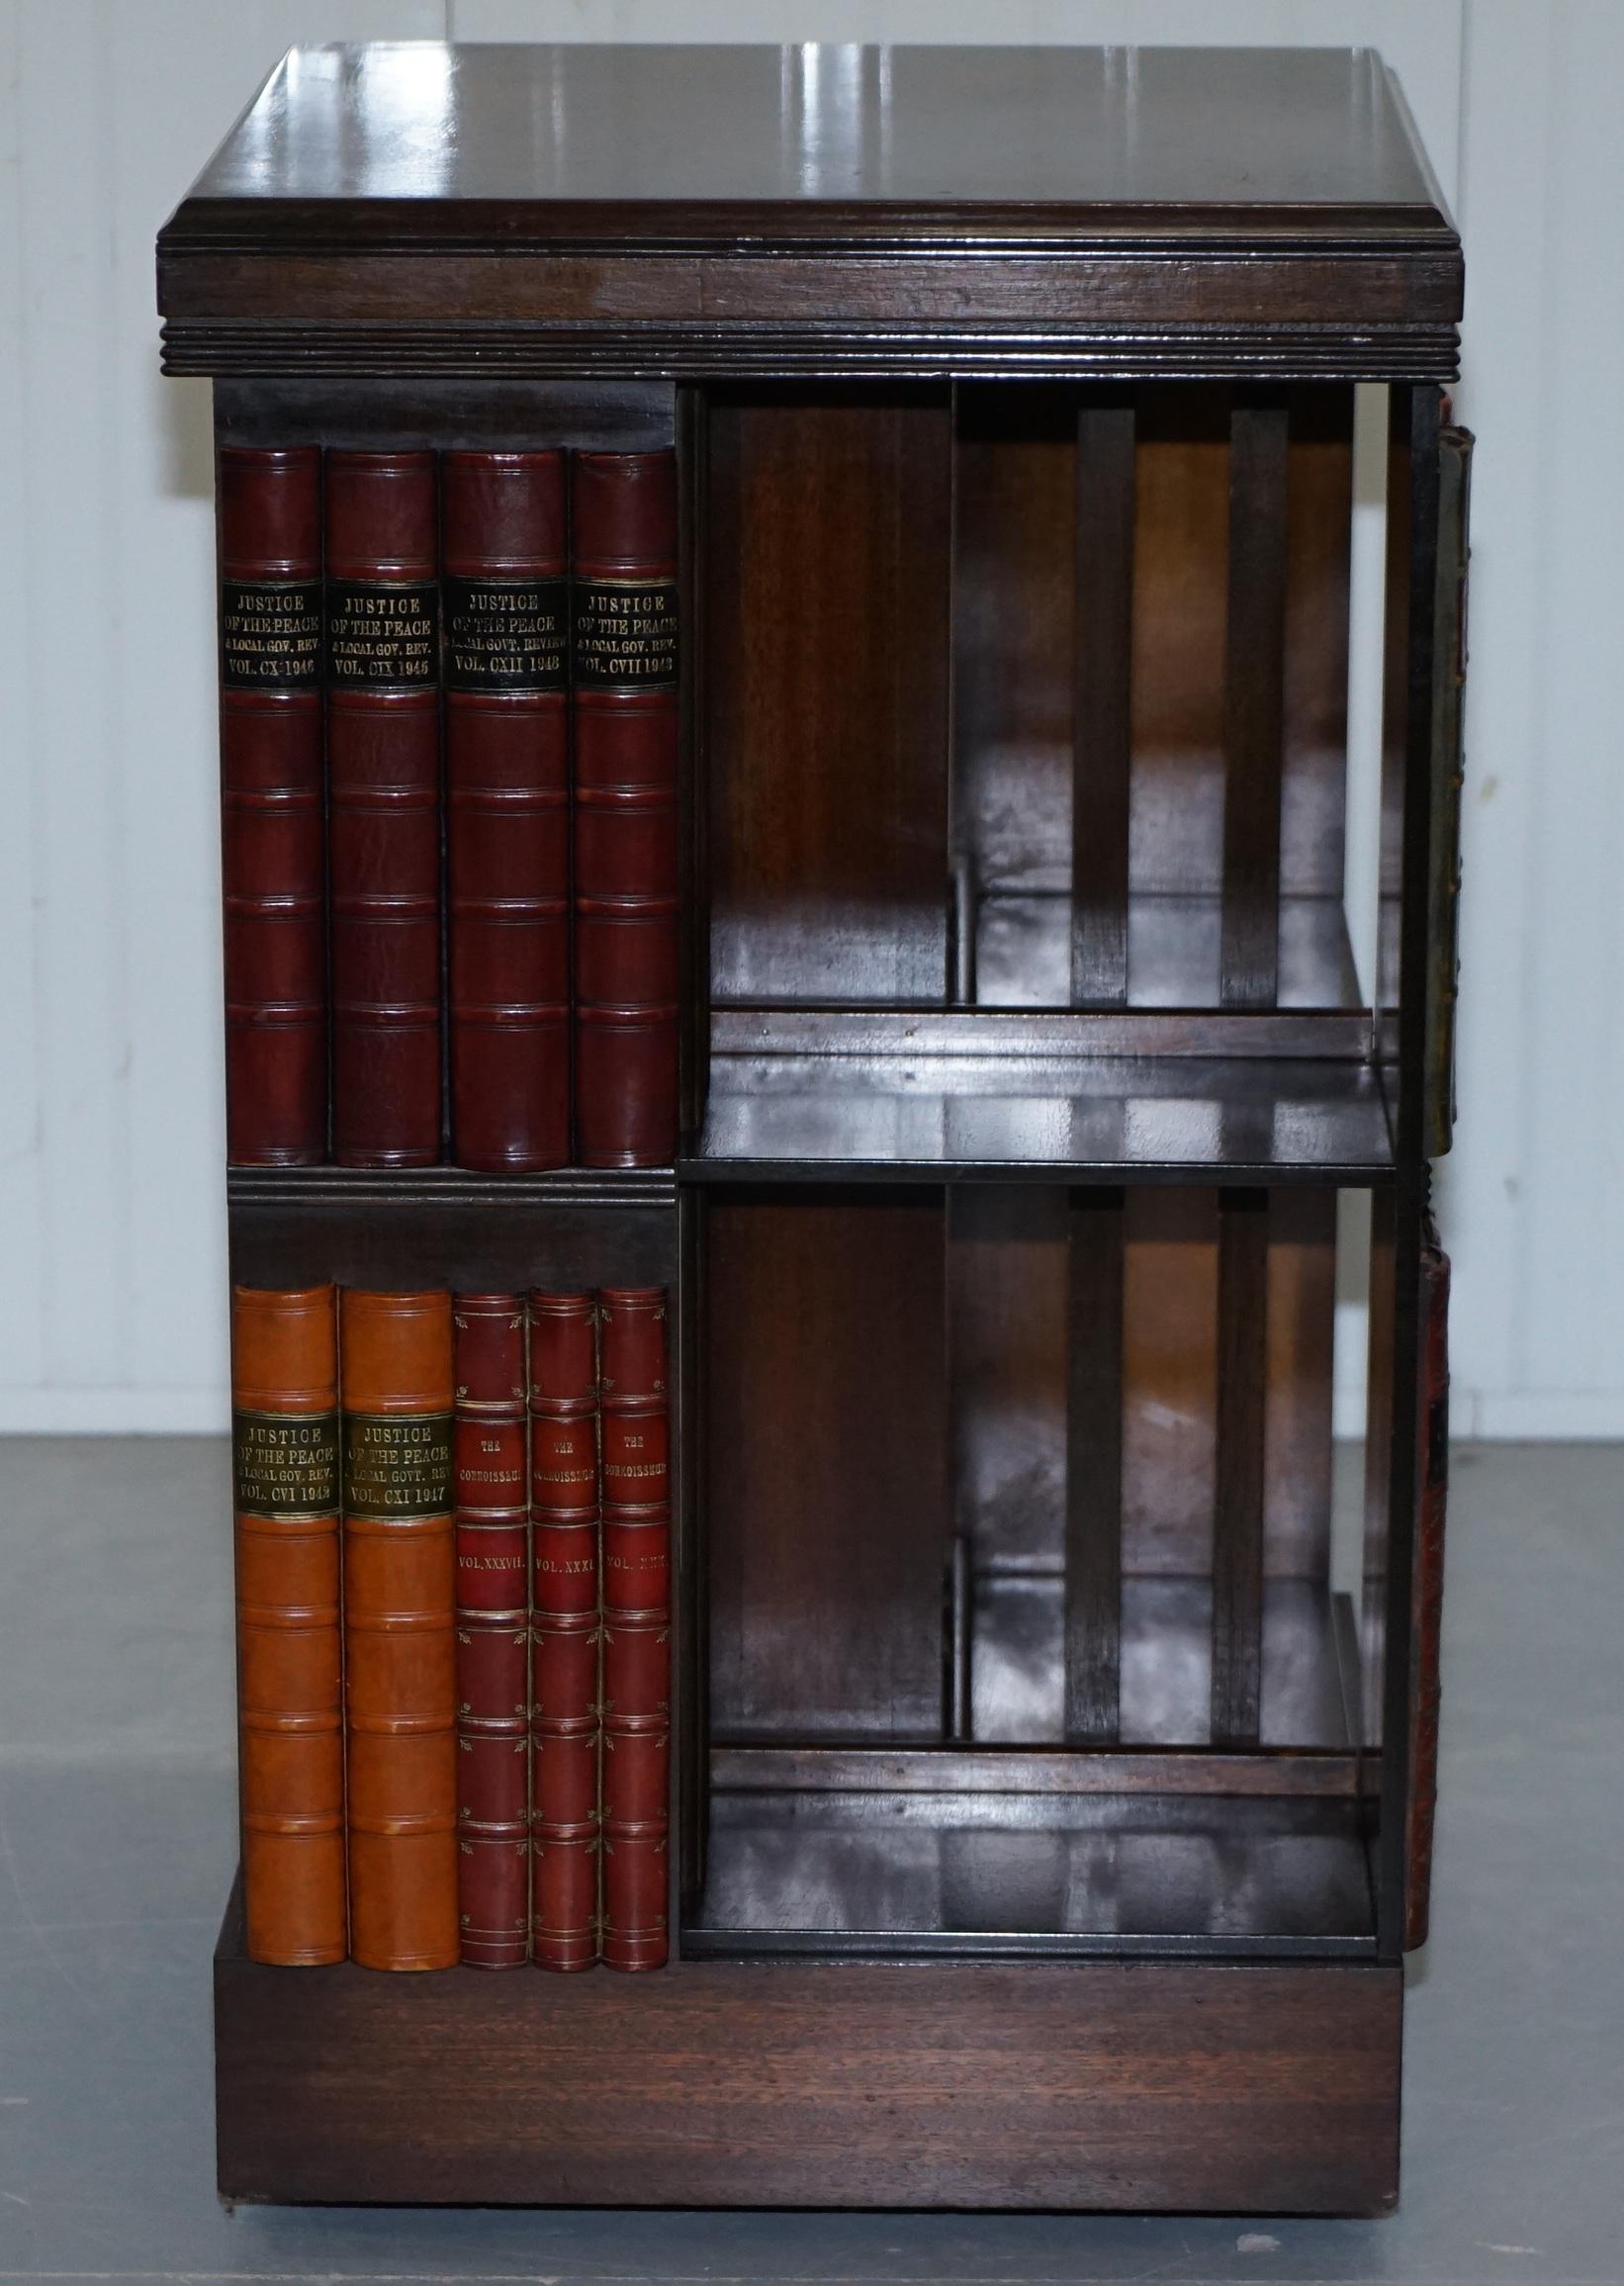 We are delighted to offer for sale this stunning vintage solid flamed mahogany revolving carousel swivel bookcase on wheels

A very rare find with the faux books in place, reminiscent of the Gillow’s kidney desk that has the faux library to the